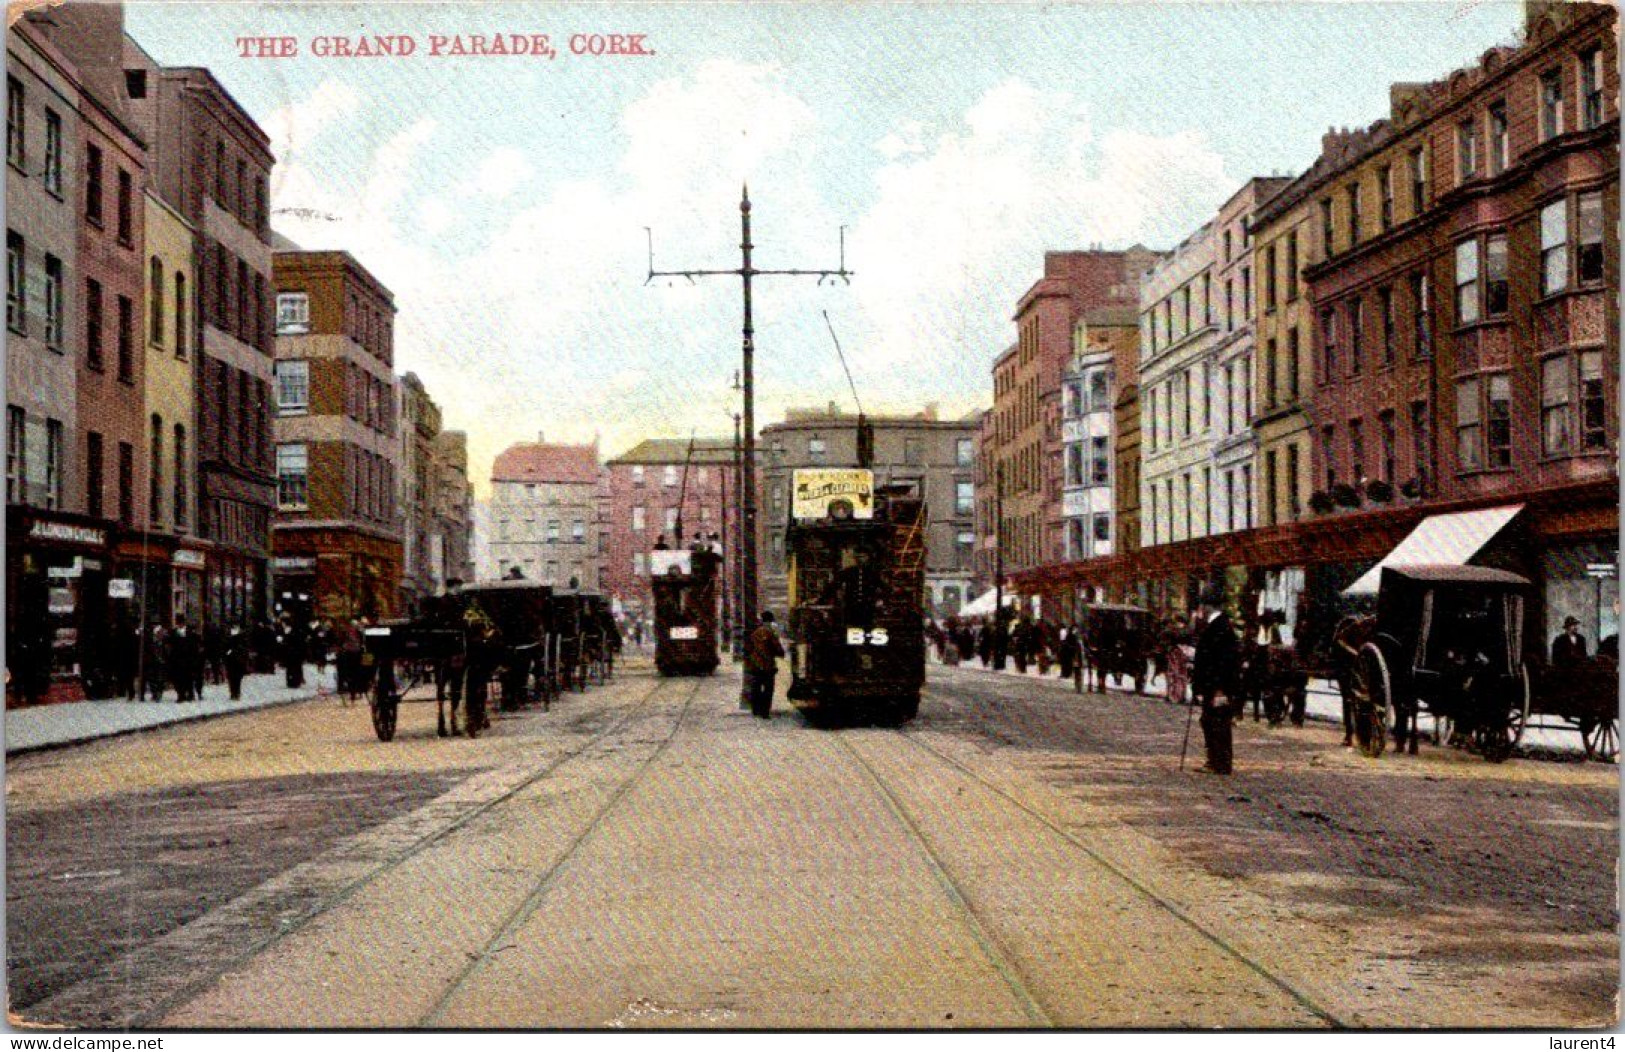 4-4-2024 (1 Z 1) Ireland (posted From Ireland To Cheshire In 1908 ?) Cork - The Gran Parade (with Tramway) - Cork